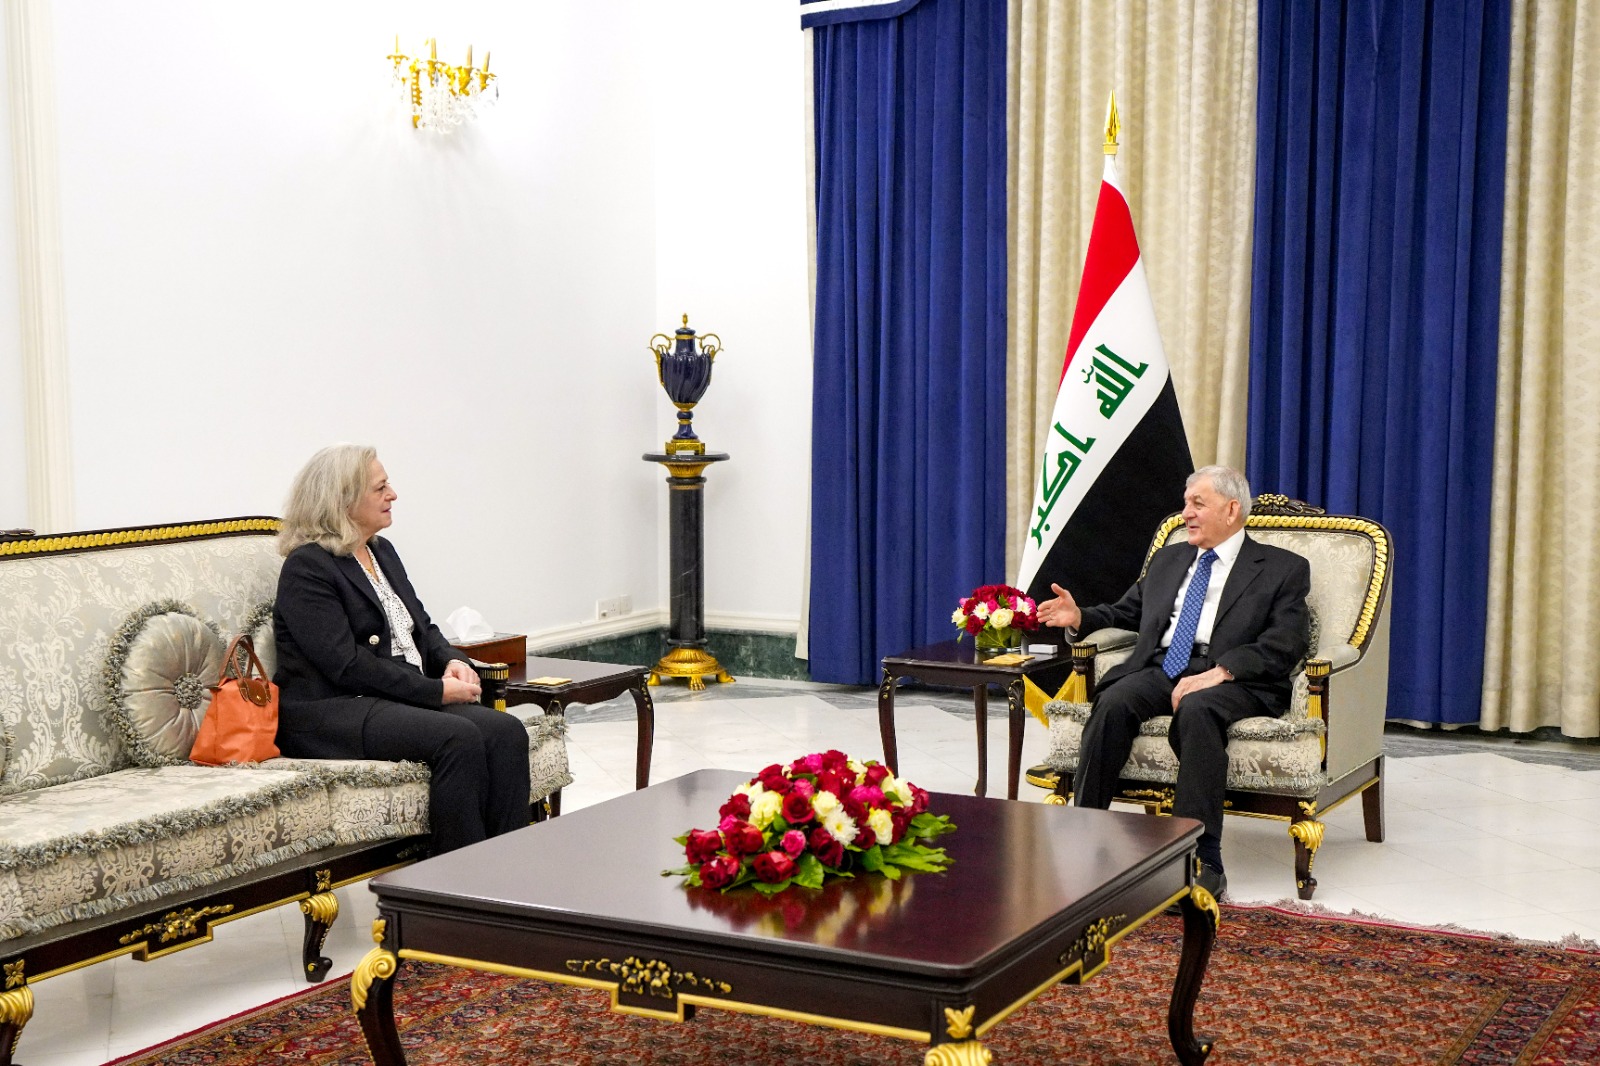 Iraqi President and US Ambassador Discuss Deepening Relations and Strengthening Cooperation